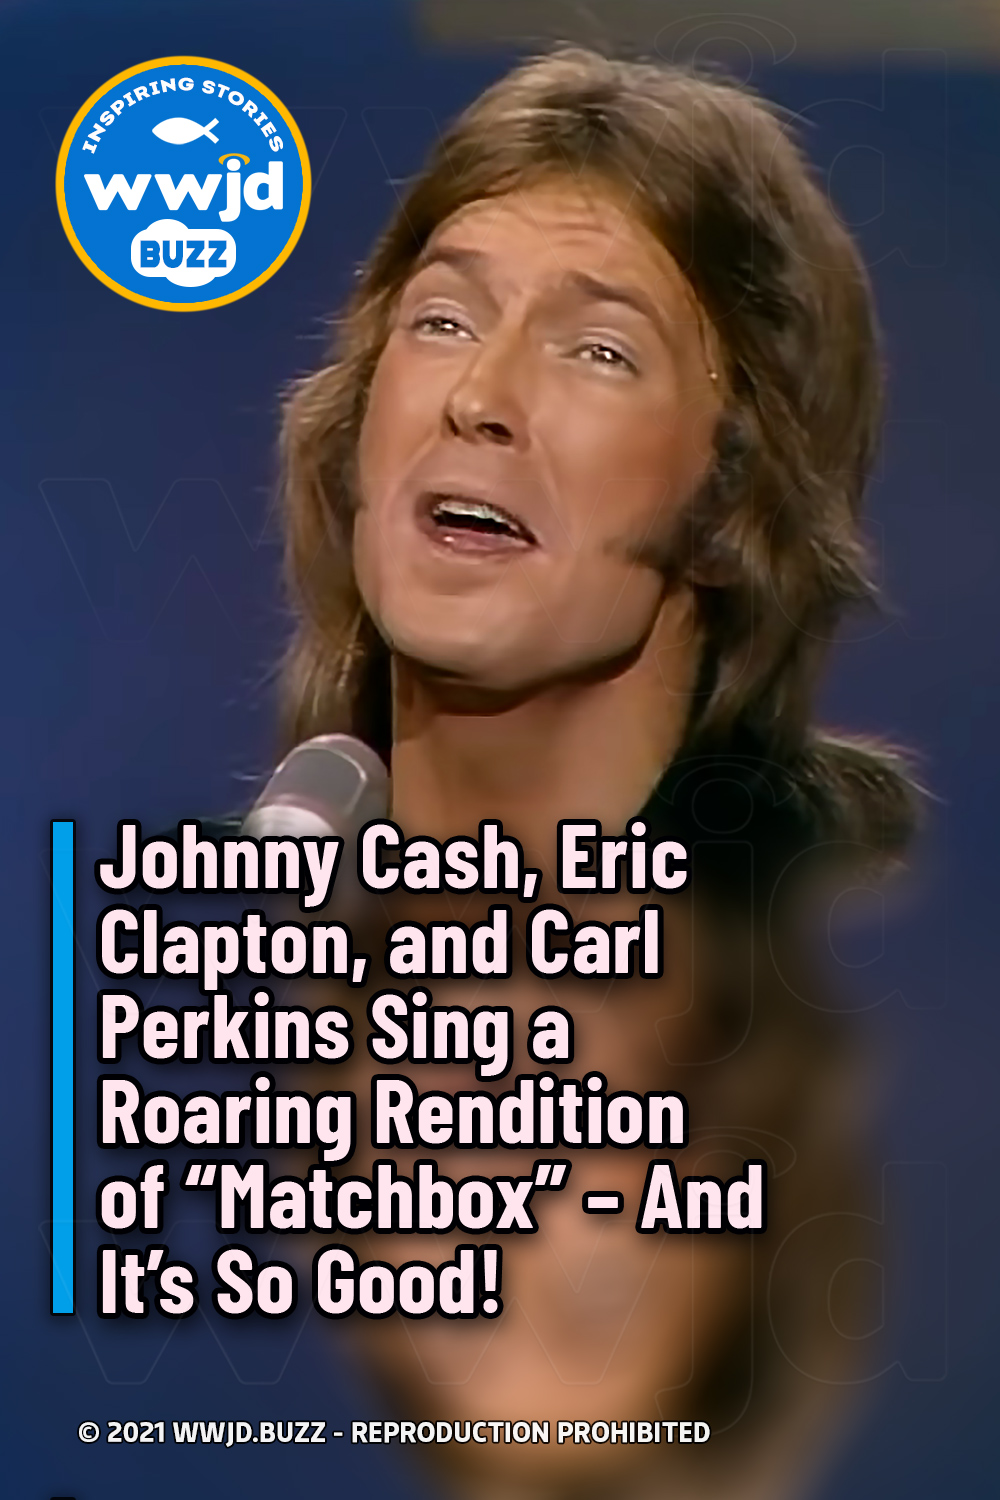 Johnny Cash, Eric Clapton, and Carl Perkins Sing a Roaring Rendition of “Matchbox” - And It\'s So Good!